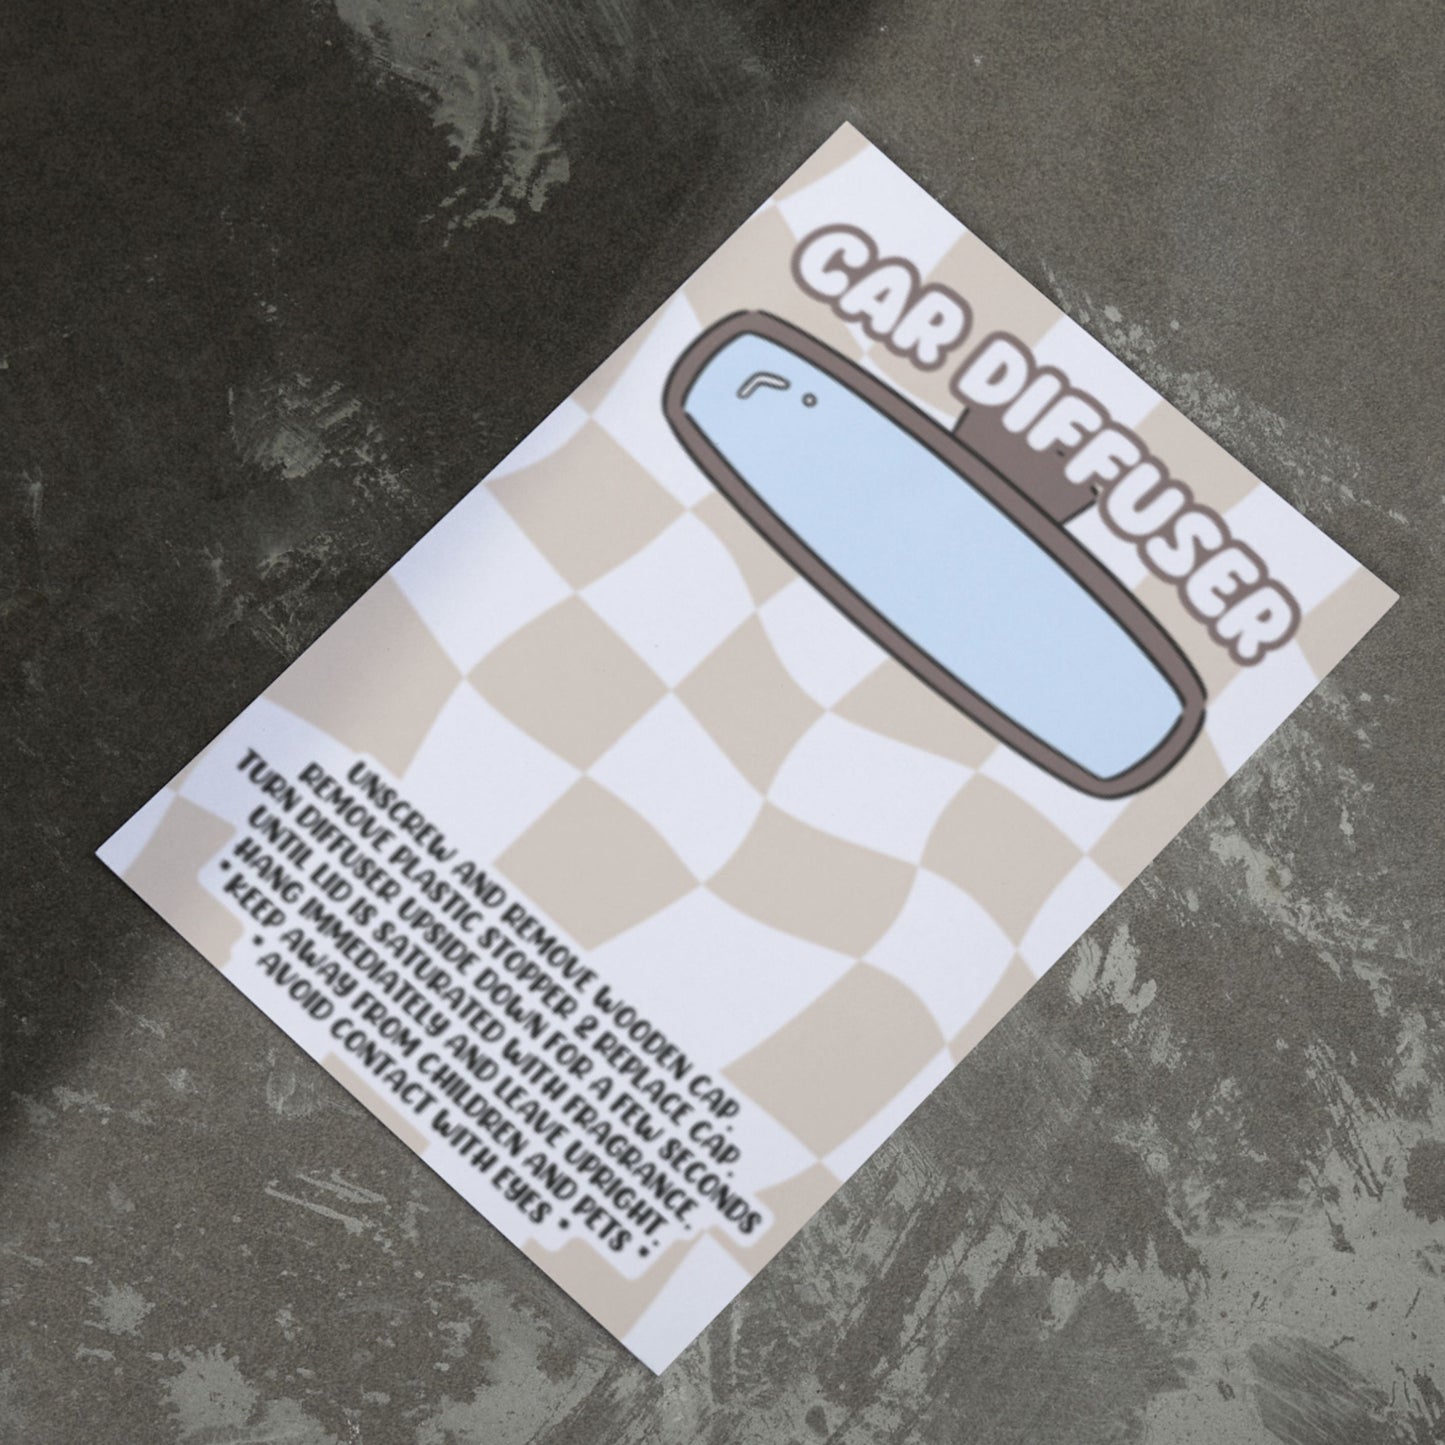 Car Oil Diffuser Package Bag Insert Care Instruction Cards | 50 pk 5x7” Tan Checkered